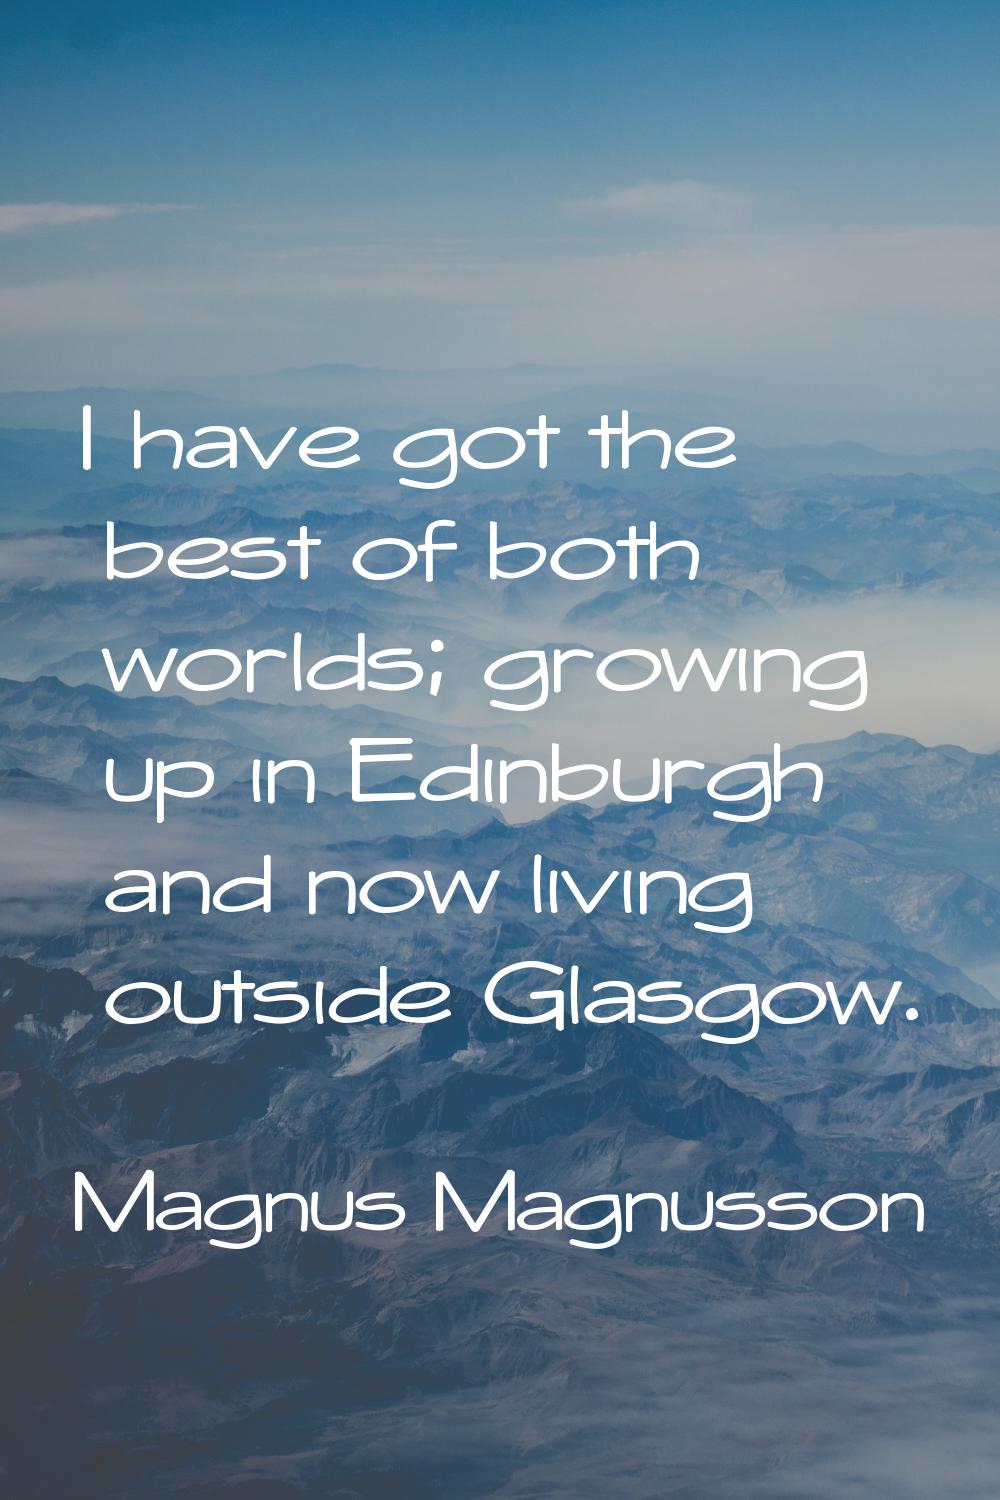 I have got the best of both worlds; growing up in Edinburgh and now living outside Glasgow.